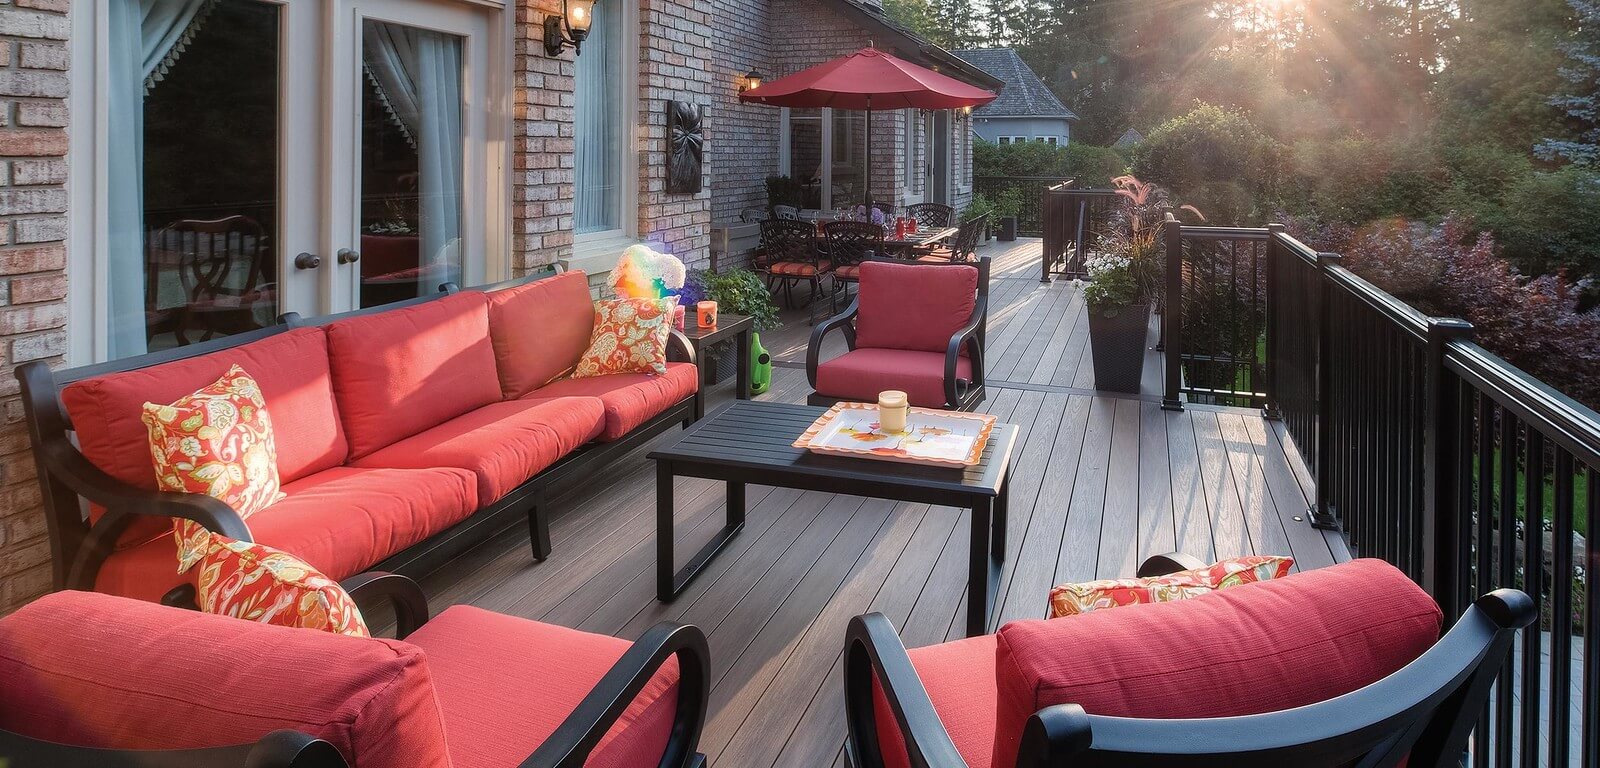 Are You a Deck Builder in Edmonton and Don&amp;#39;t Know Where to Begin?